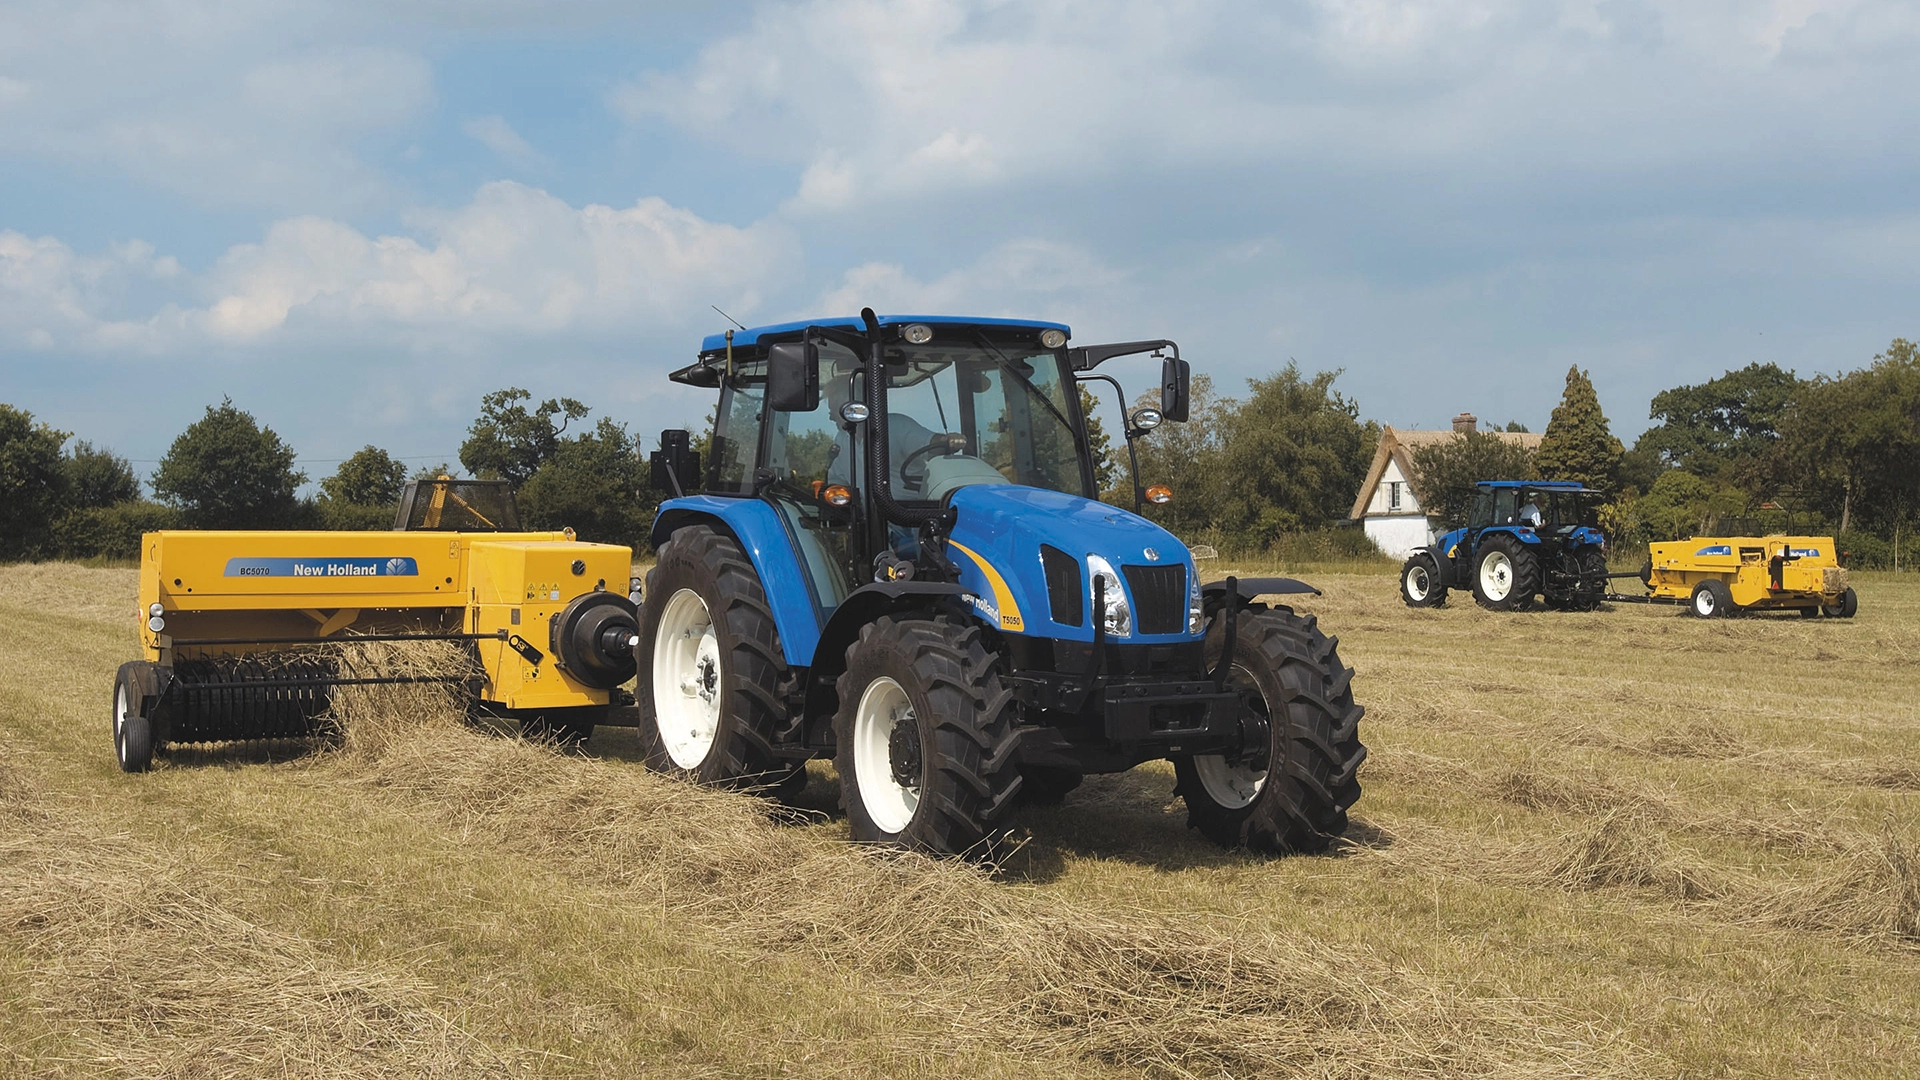 Pair of New Holland tractors operating BC5000 balers in a rural field.